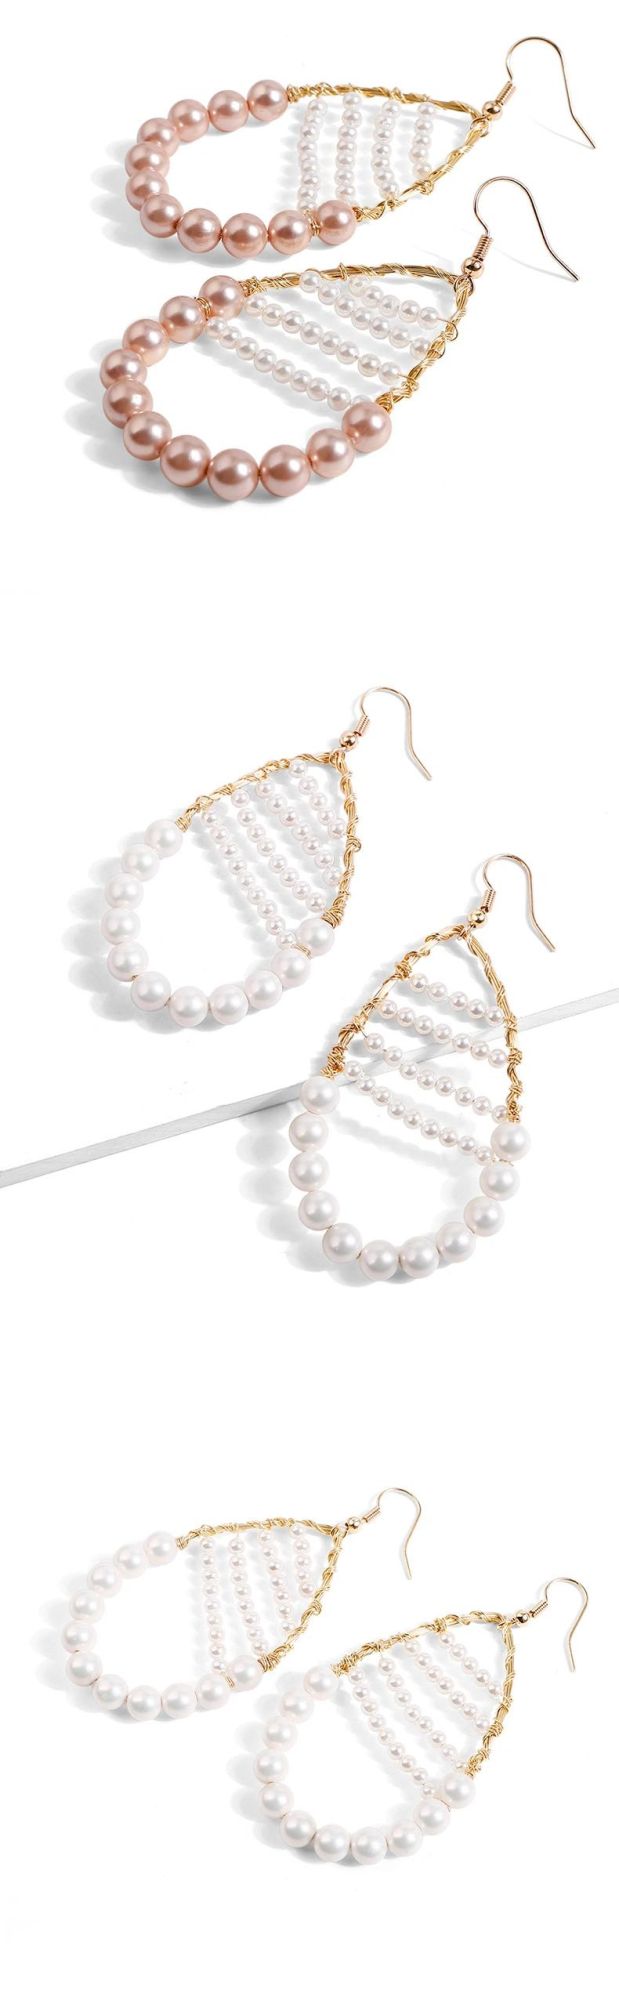 Alloy Oval Fashion Jewelry Antique Pearl Earrings for Women